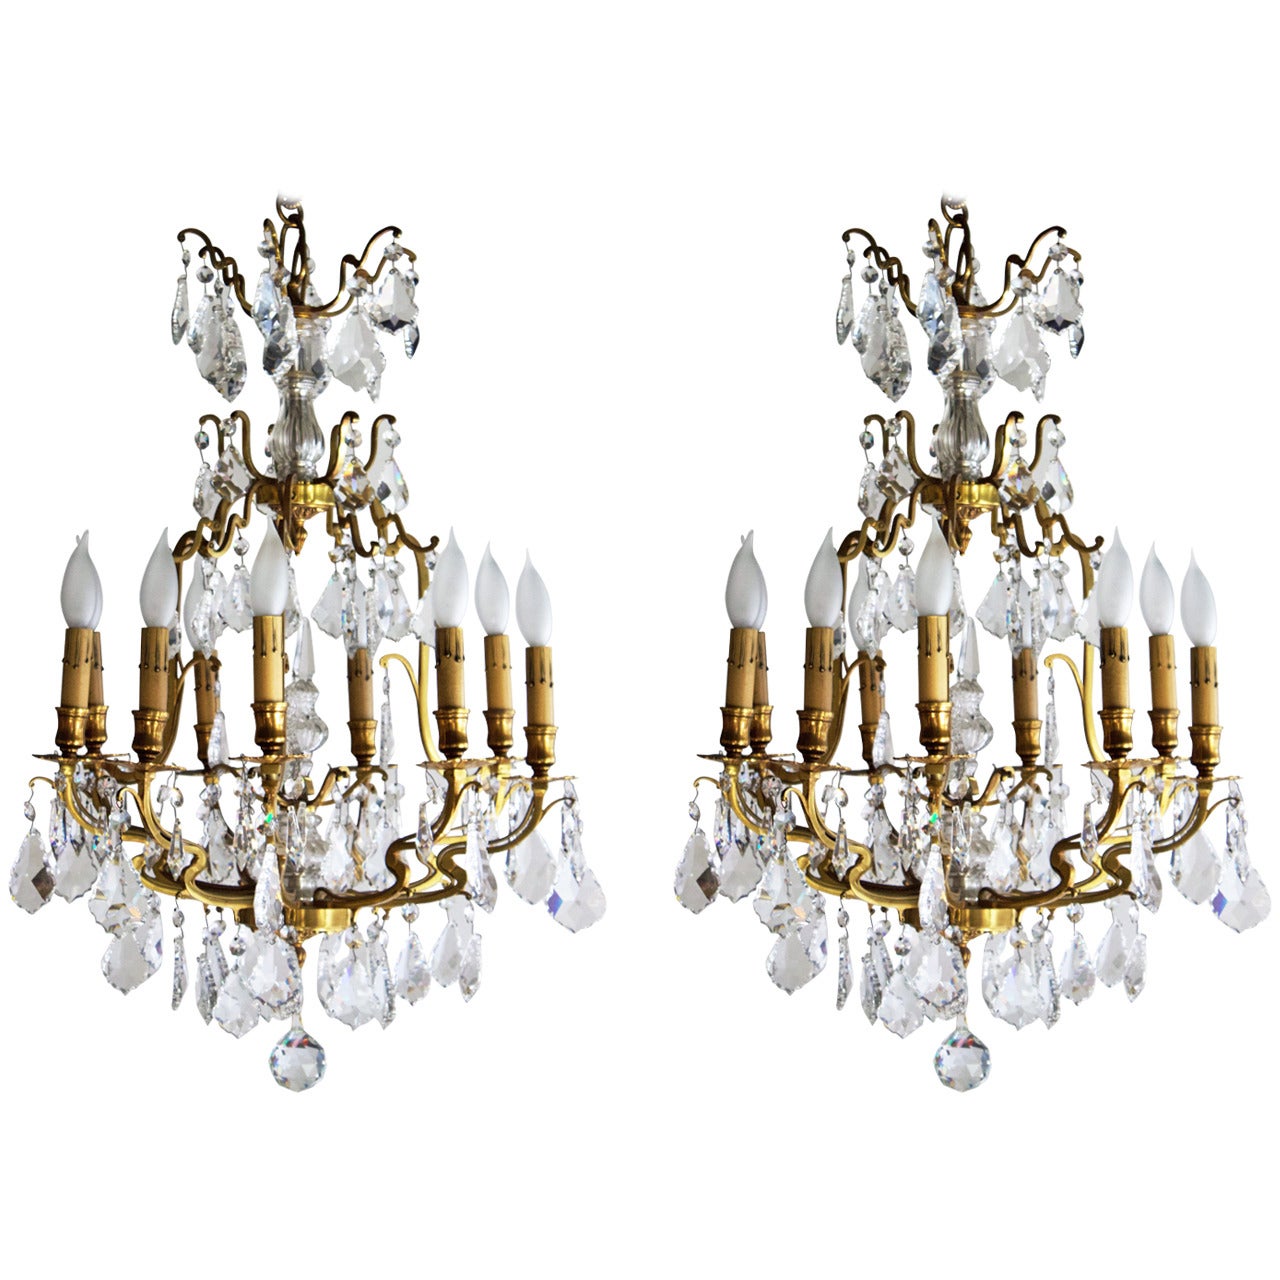 Pair of Gilt Bronze and Crystal Louis XV Style Chandeliers For Sale